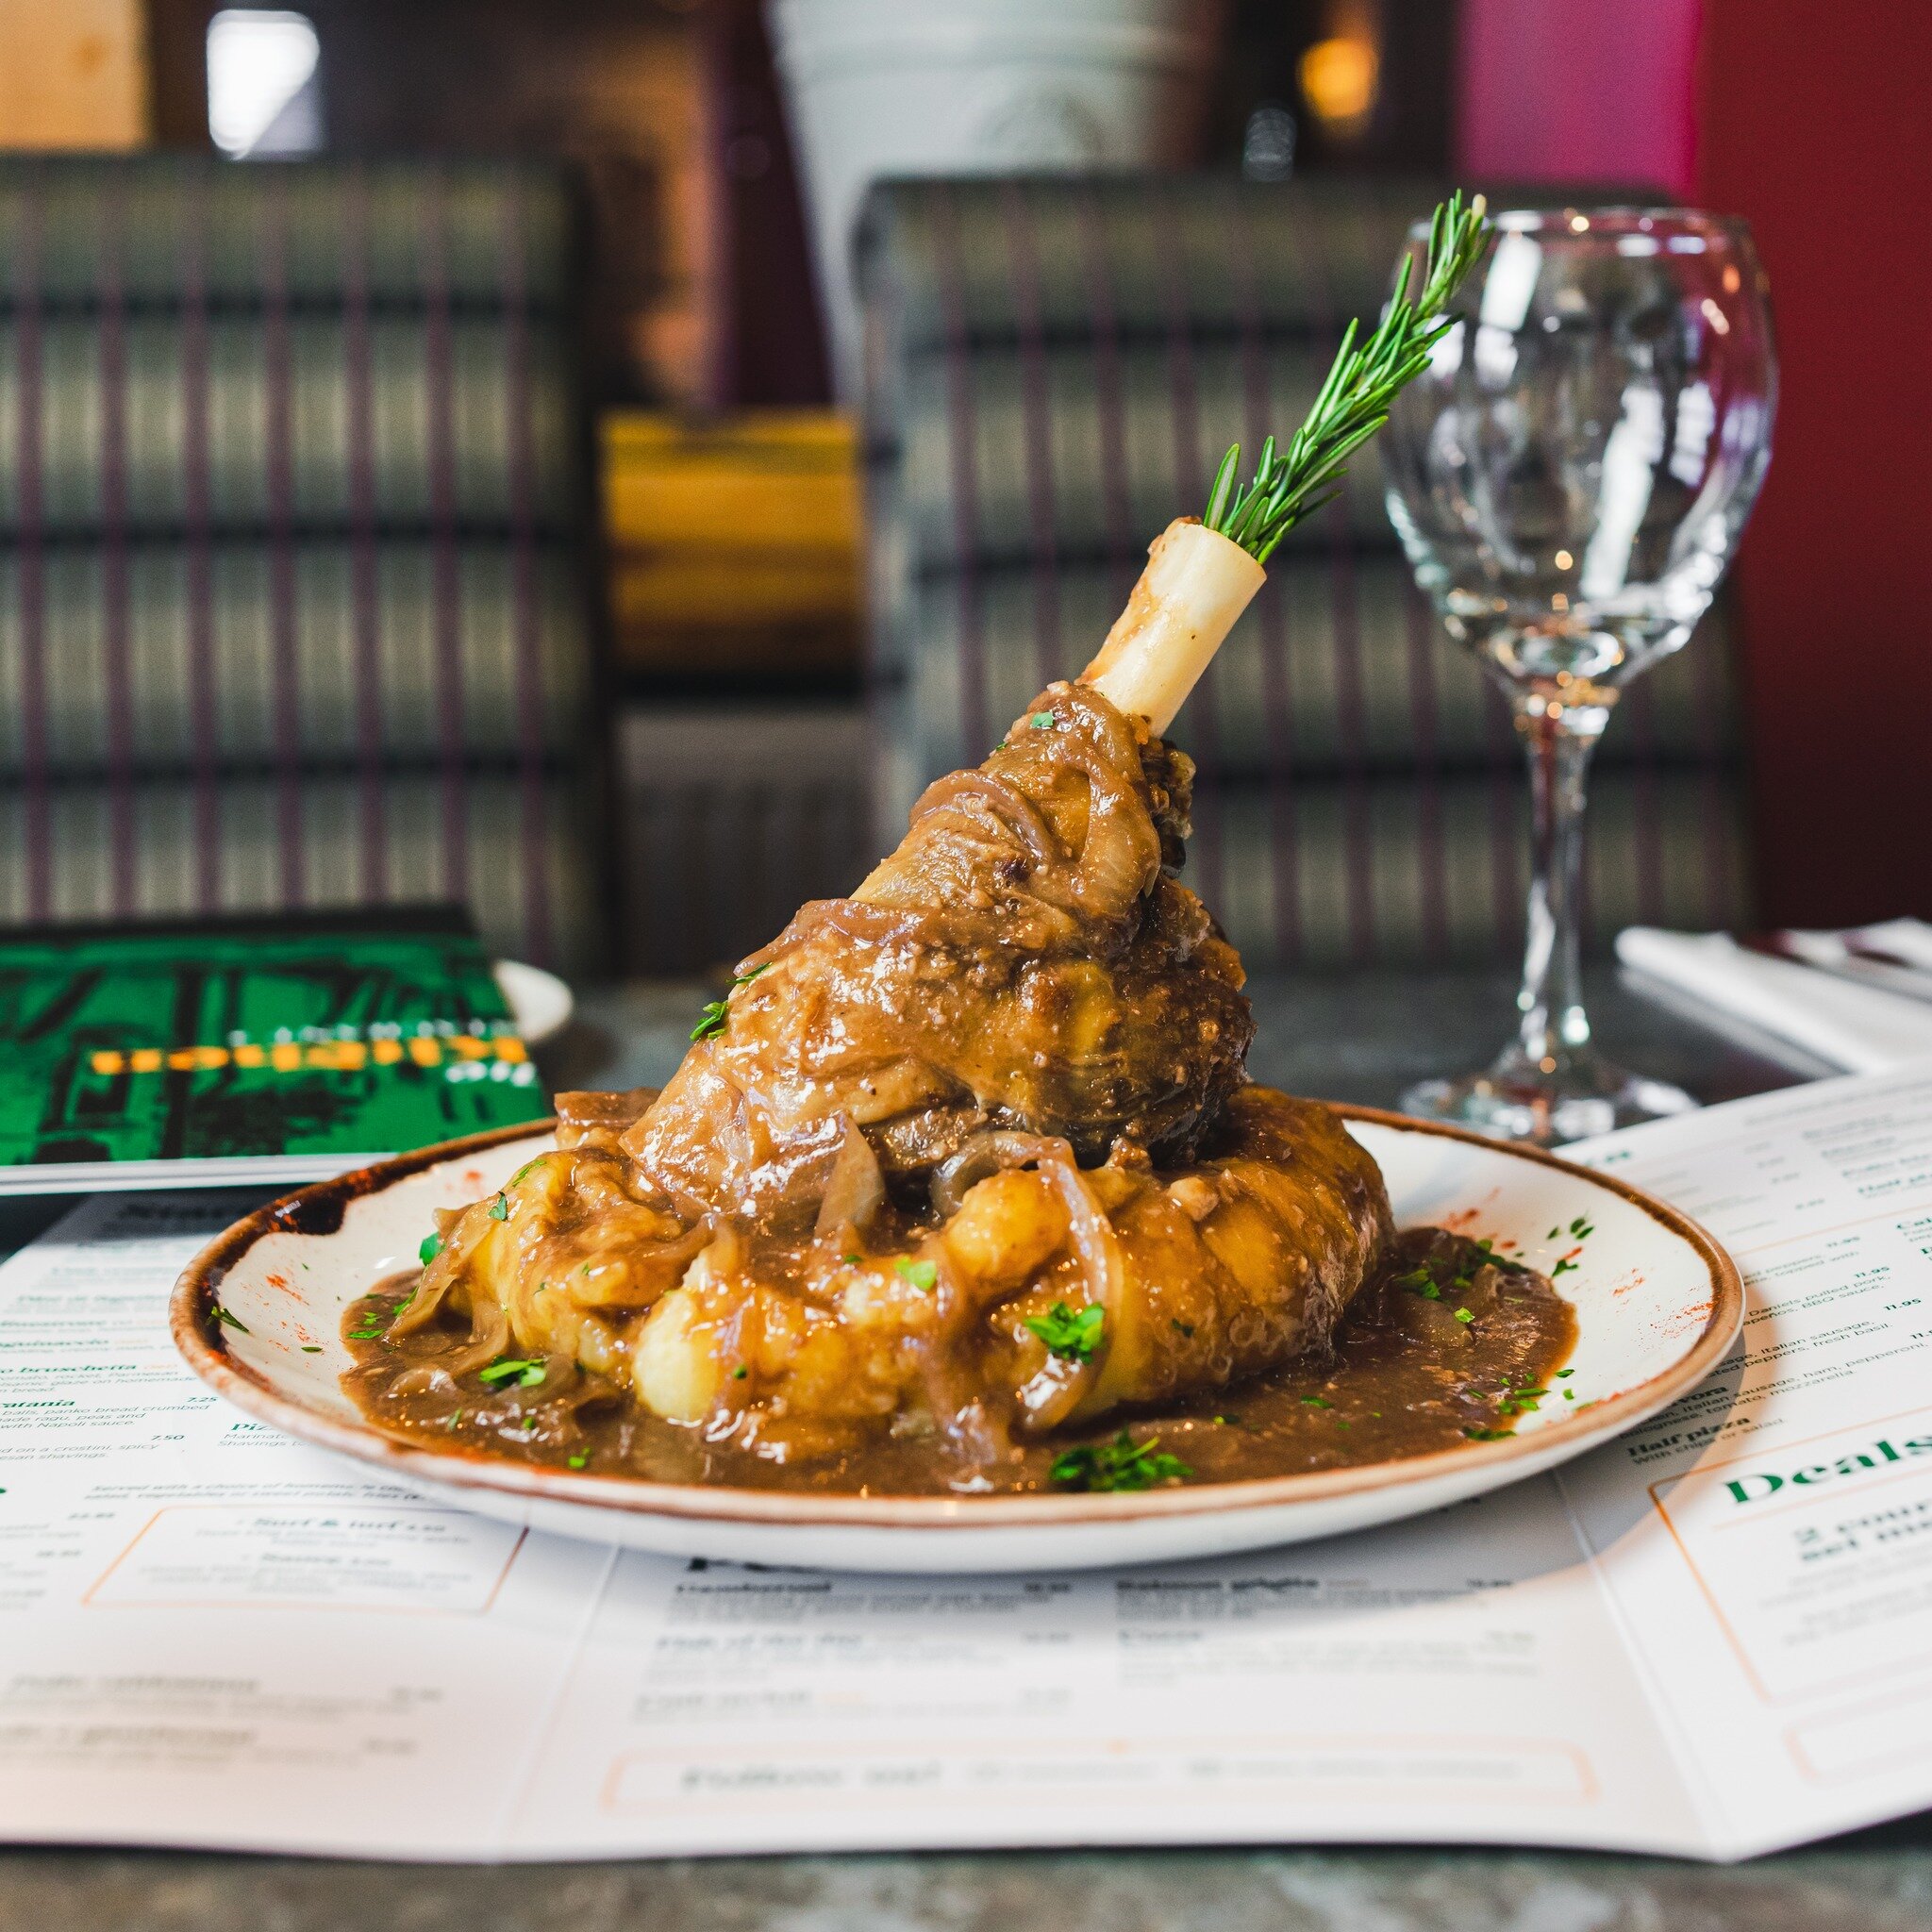 𝐒𝐭𝐢𝐧𝐜𝐨 𝐝𝐢 𝐚𝐠𝐧𝐞𝐥𝐥𝐨 🇮🇹 
A dish that continues to wow our customers. Here we have our gorgeous lamb shank with homemade mash, onion gravy and seasonal vegetables. Cooked to perfection 🫶🏻 

Reserve your table www.theitalian-kitchen.co.